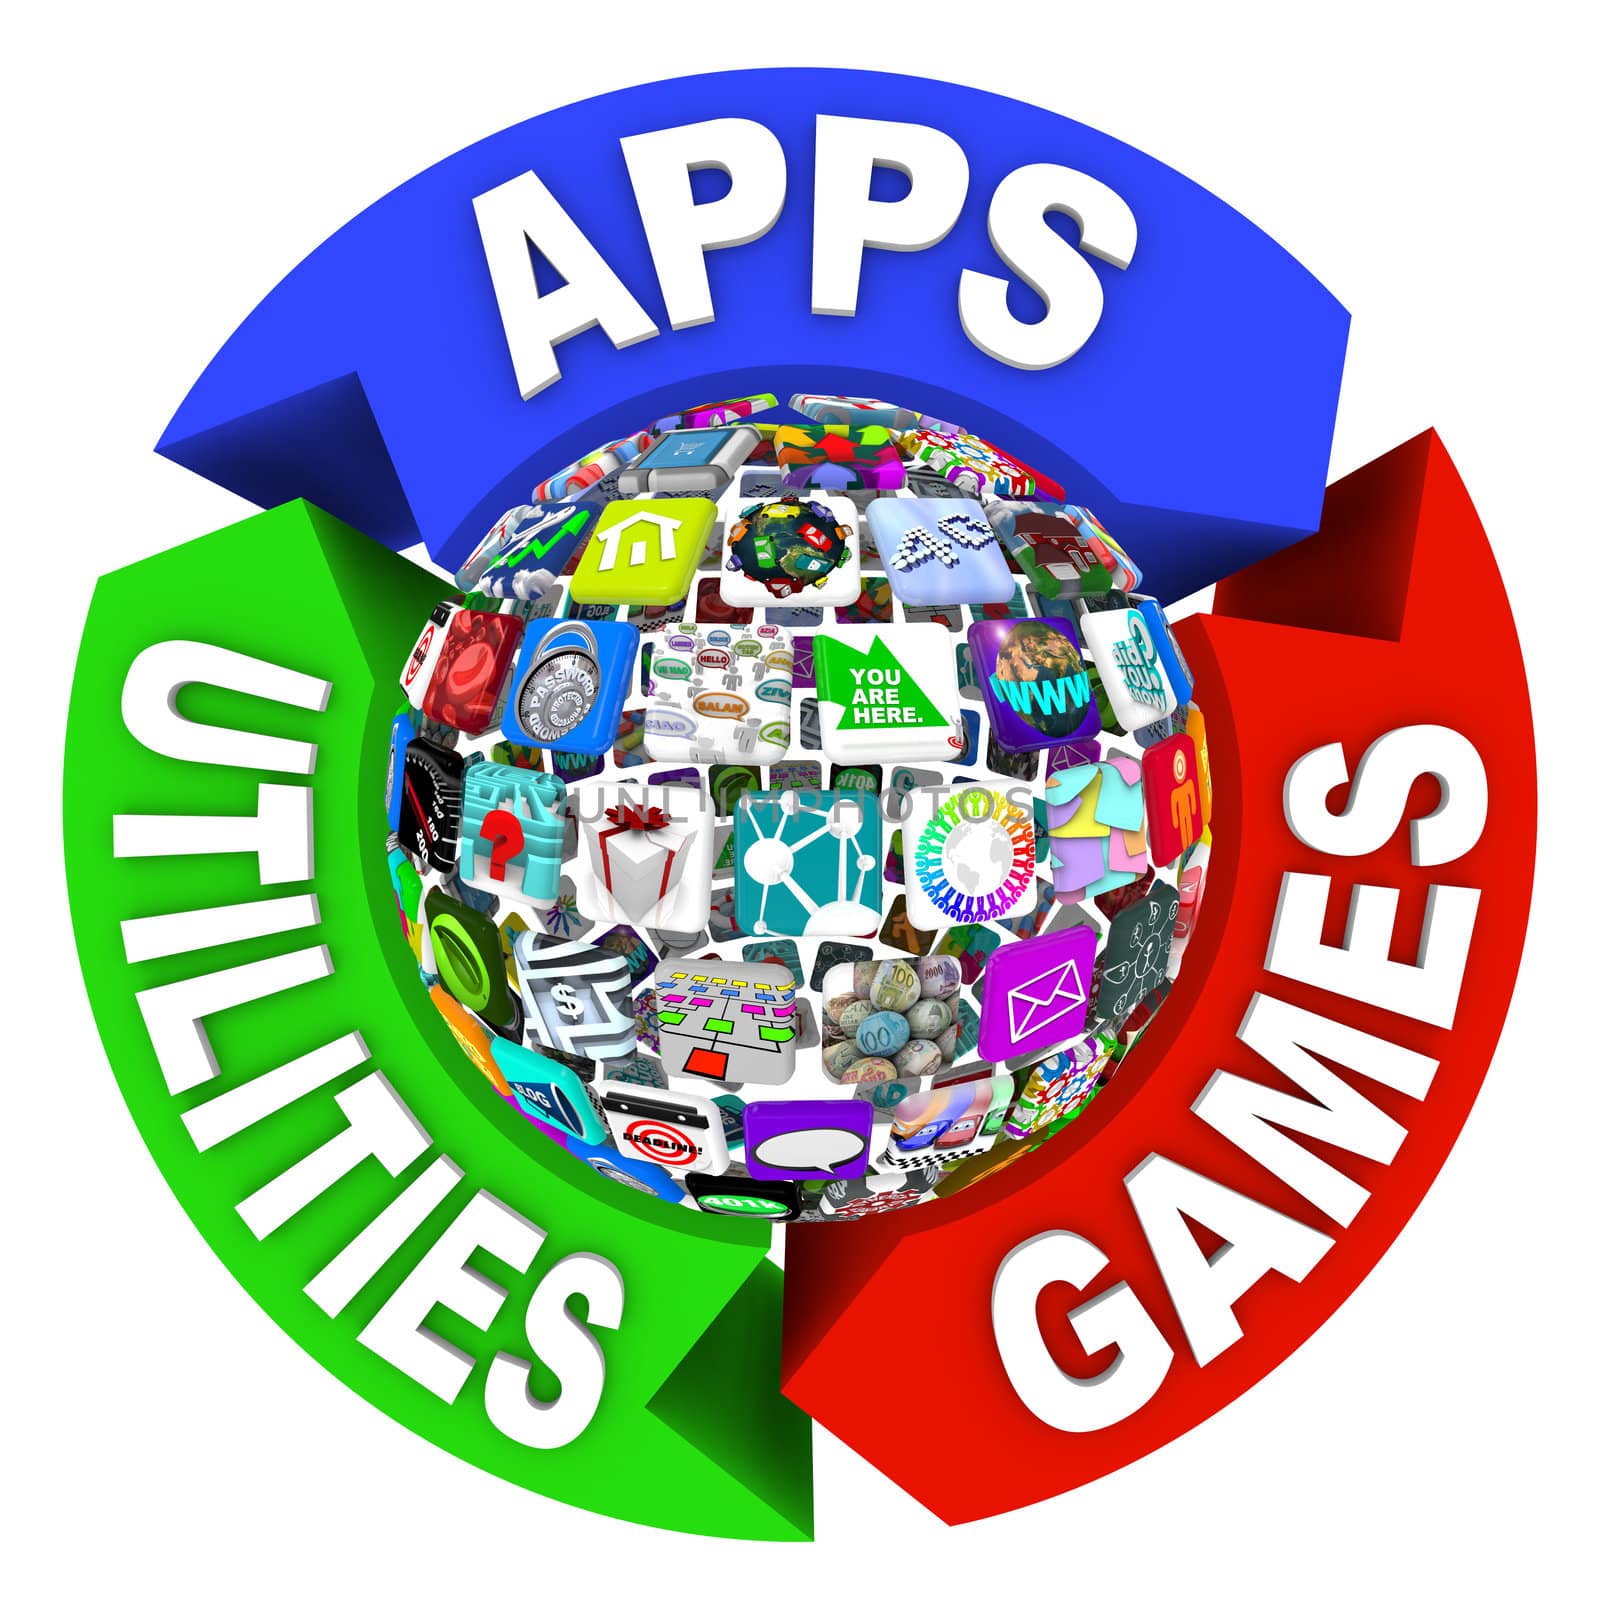 A flowhcart diagram of tiles showing applications in a sphere pattern, surrounded by arrows reading Apps, Utilities and Games